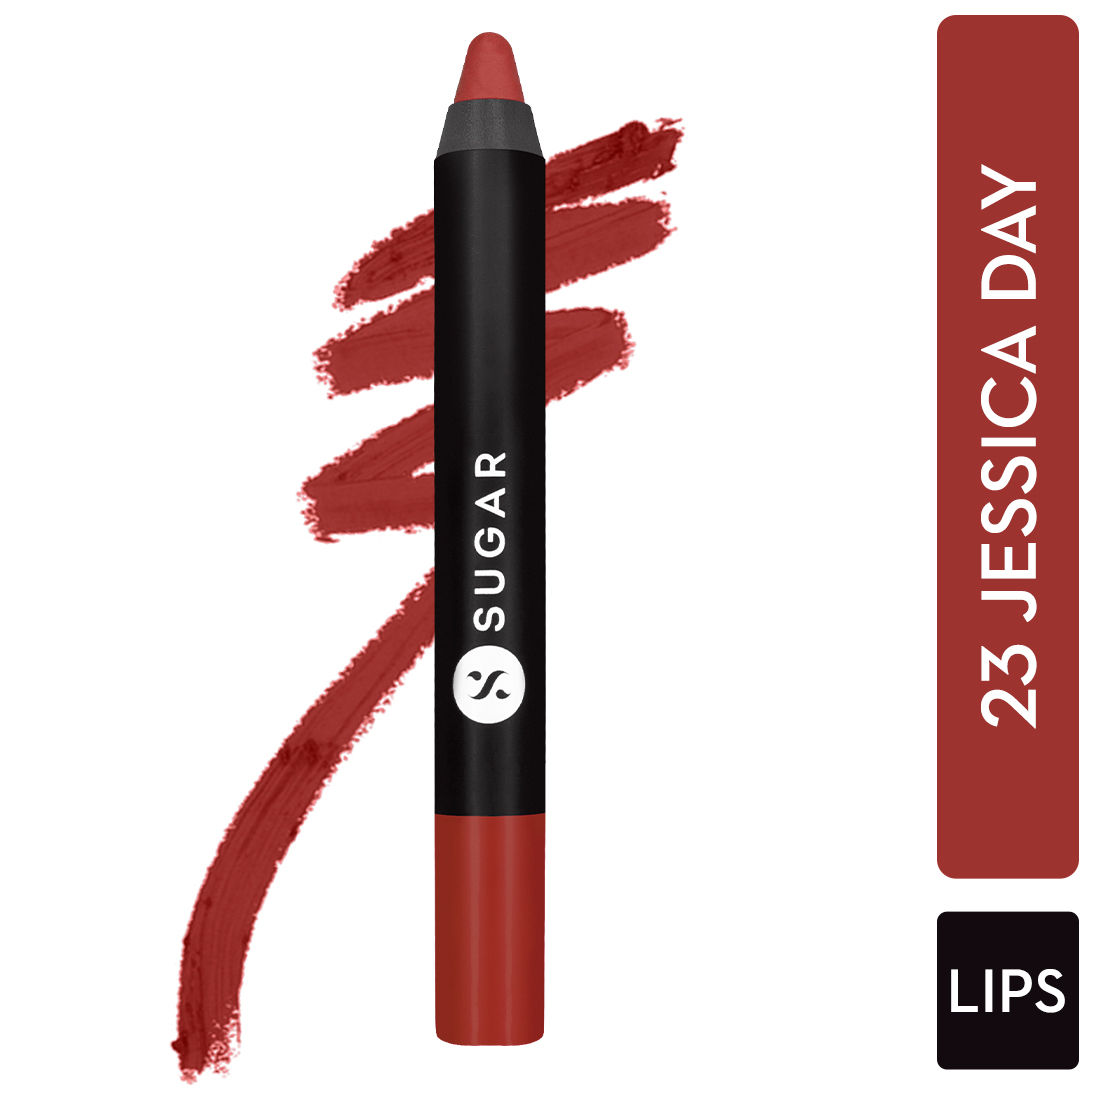 Buy SUGAR Cosmetics - Matte As Hell - Crayon Lipstick -23 Jessica Day (Dusty Coral) - 2.8 gms - Bold and Silky Matte Finish Lipstick, Lightweight, Lasts Up to 12 hours - Purplle